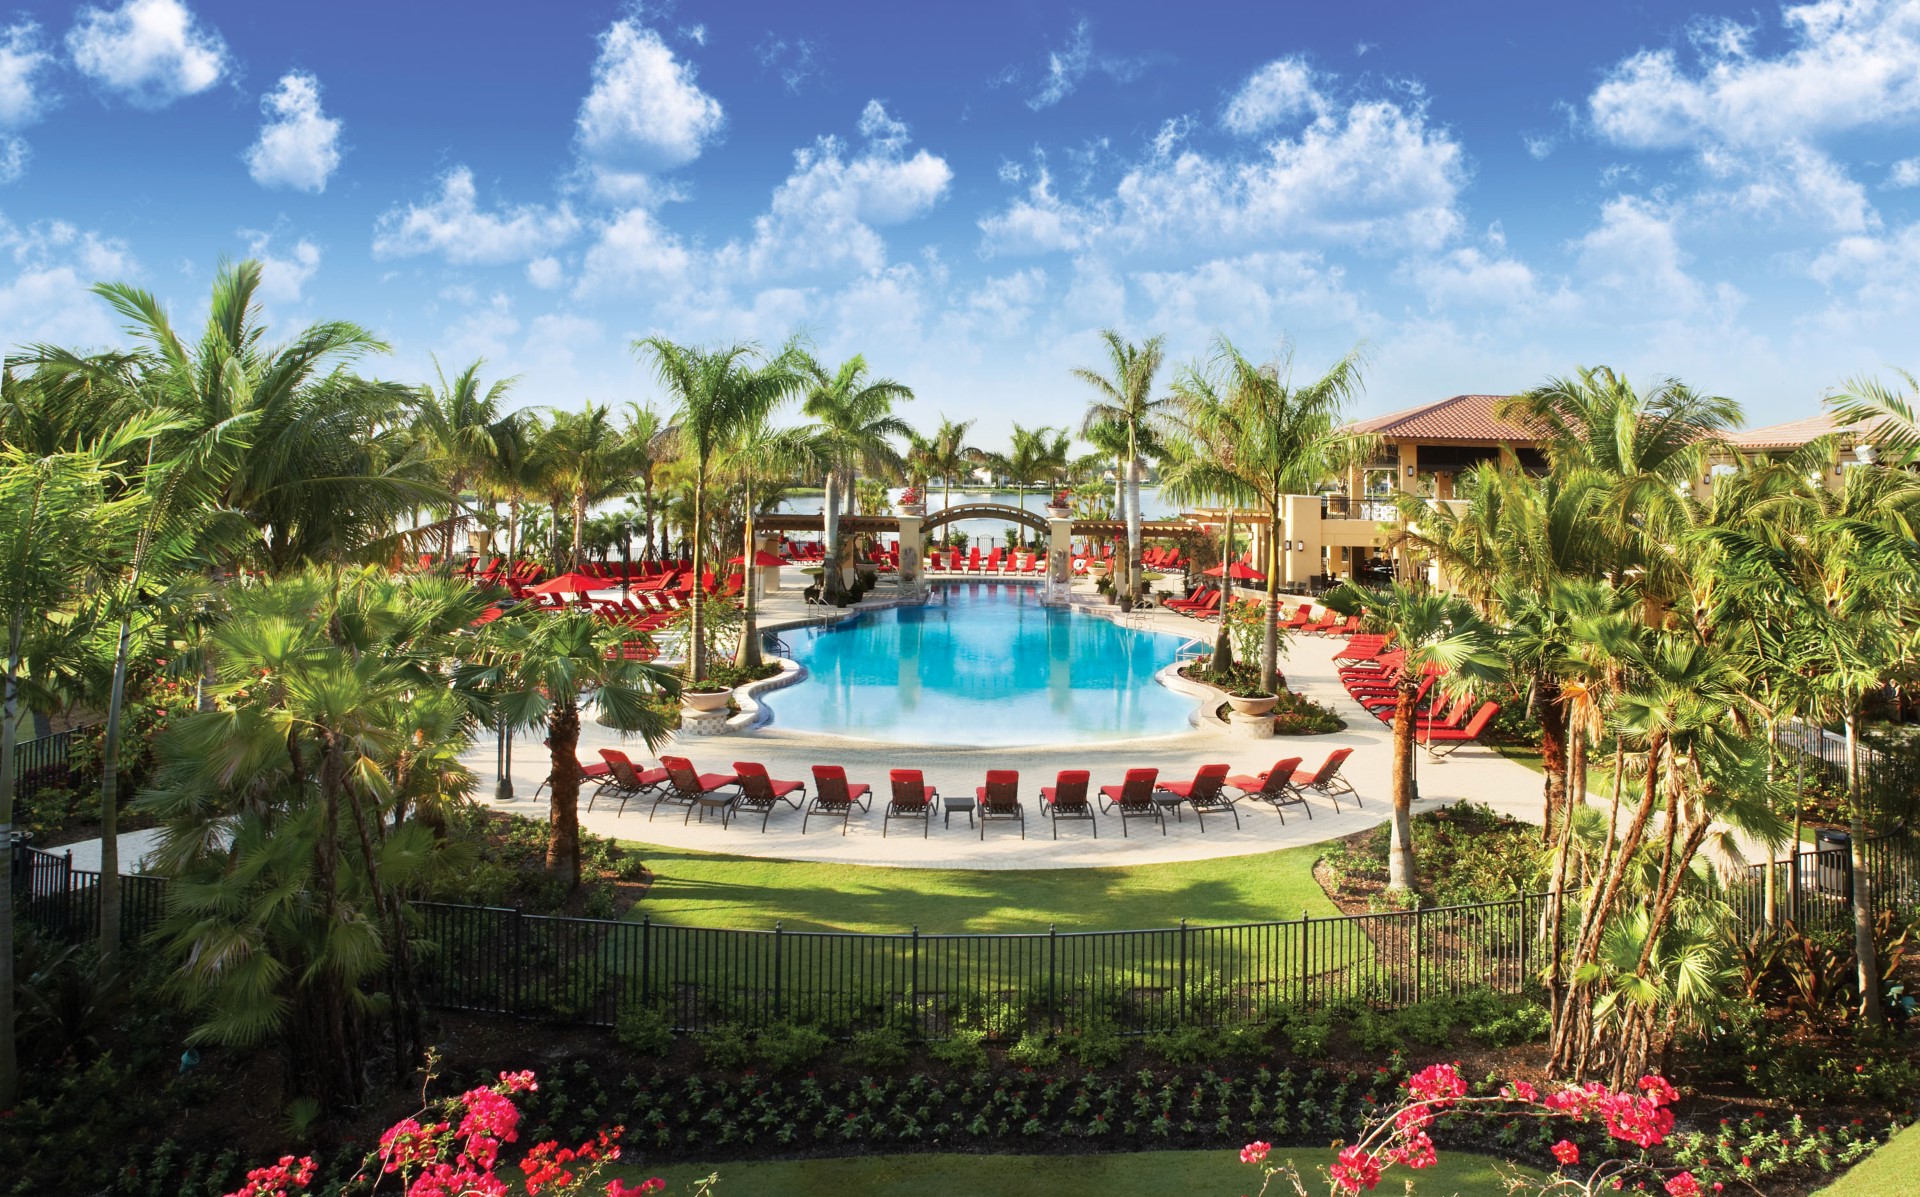 PGA National Resort and Spa. Photo Credit: The Palm Beaches